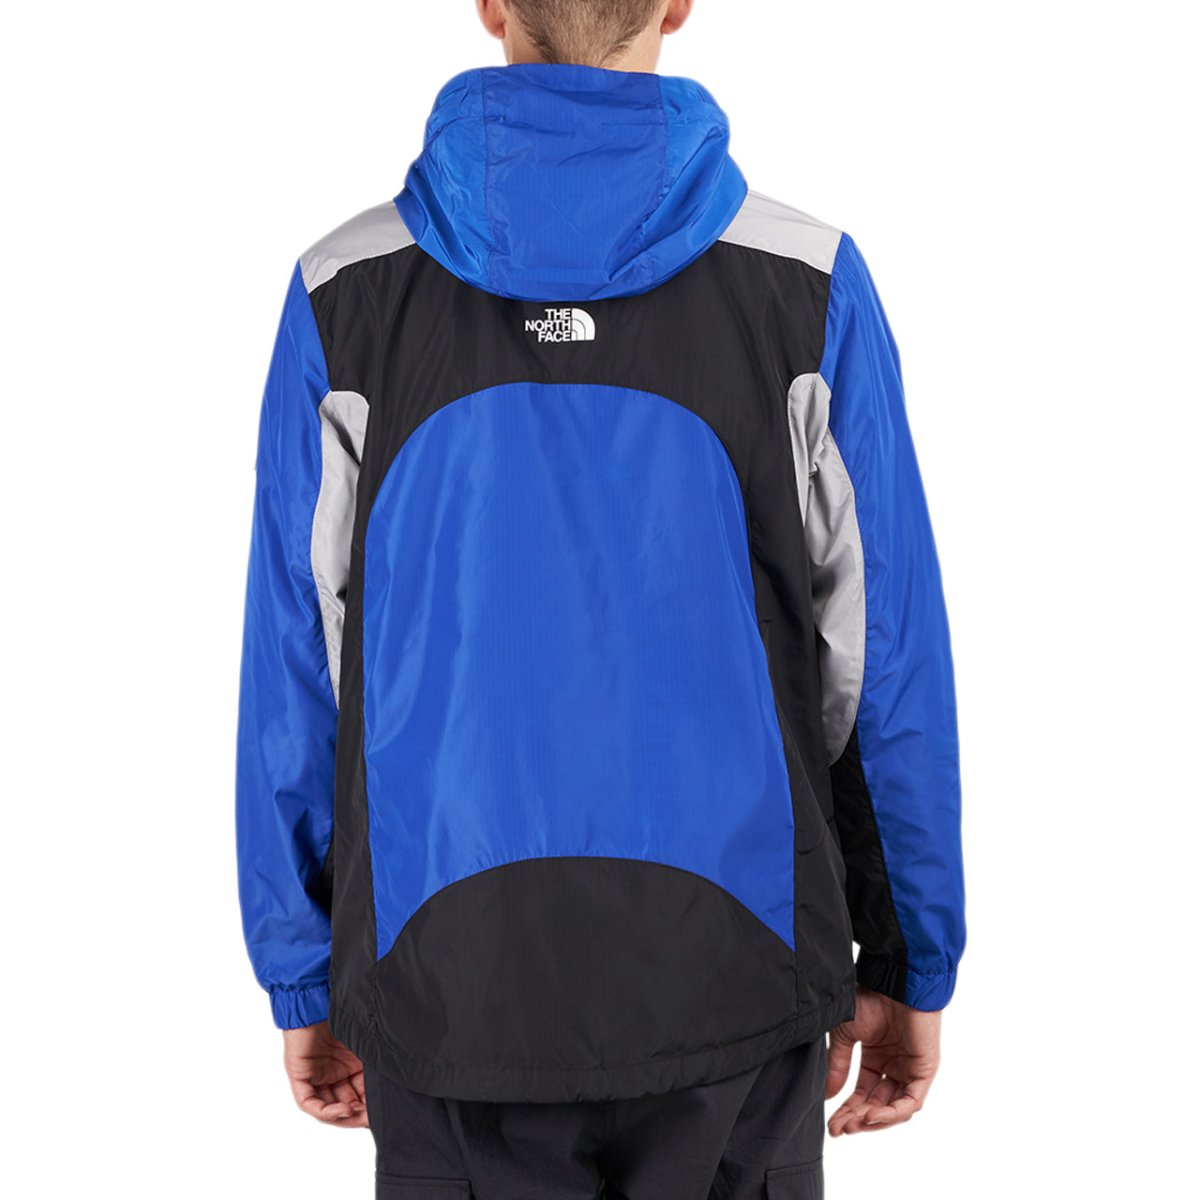 The North Face BB Search & Rescue Wind Jacket (Blue / Black / Grey)